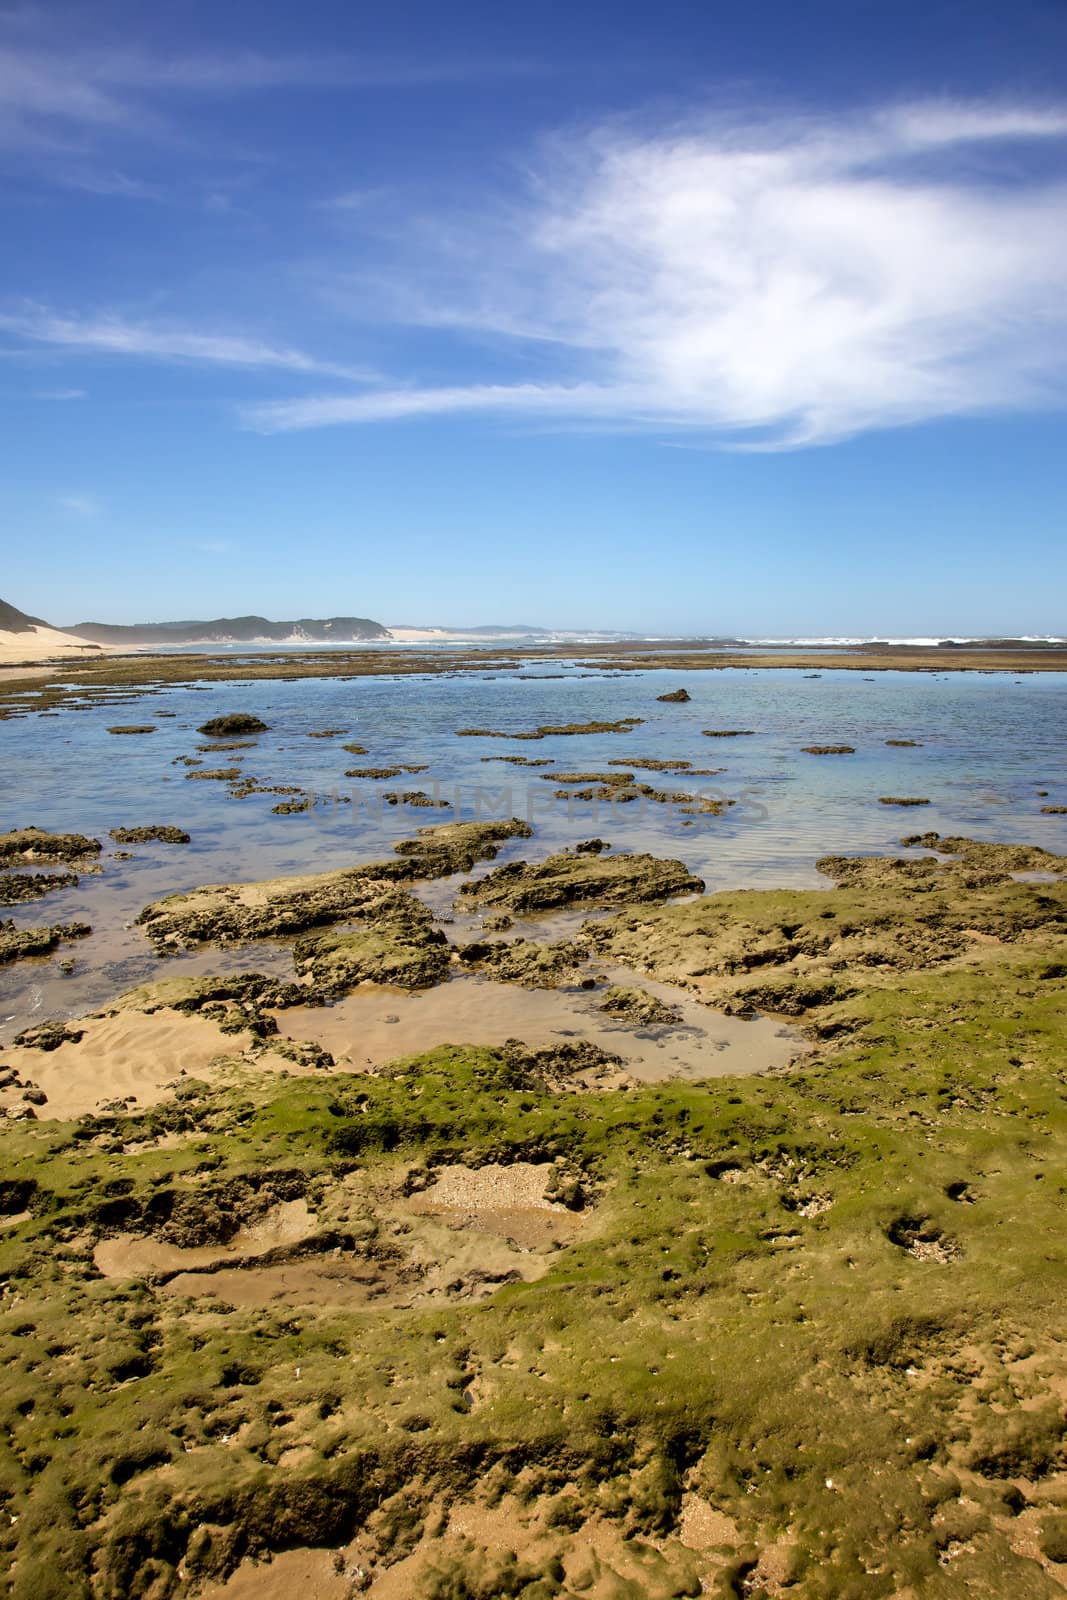 A tidal pool at Kenton-on-Sea, in South Africa's Eastern Cape.